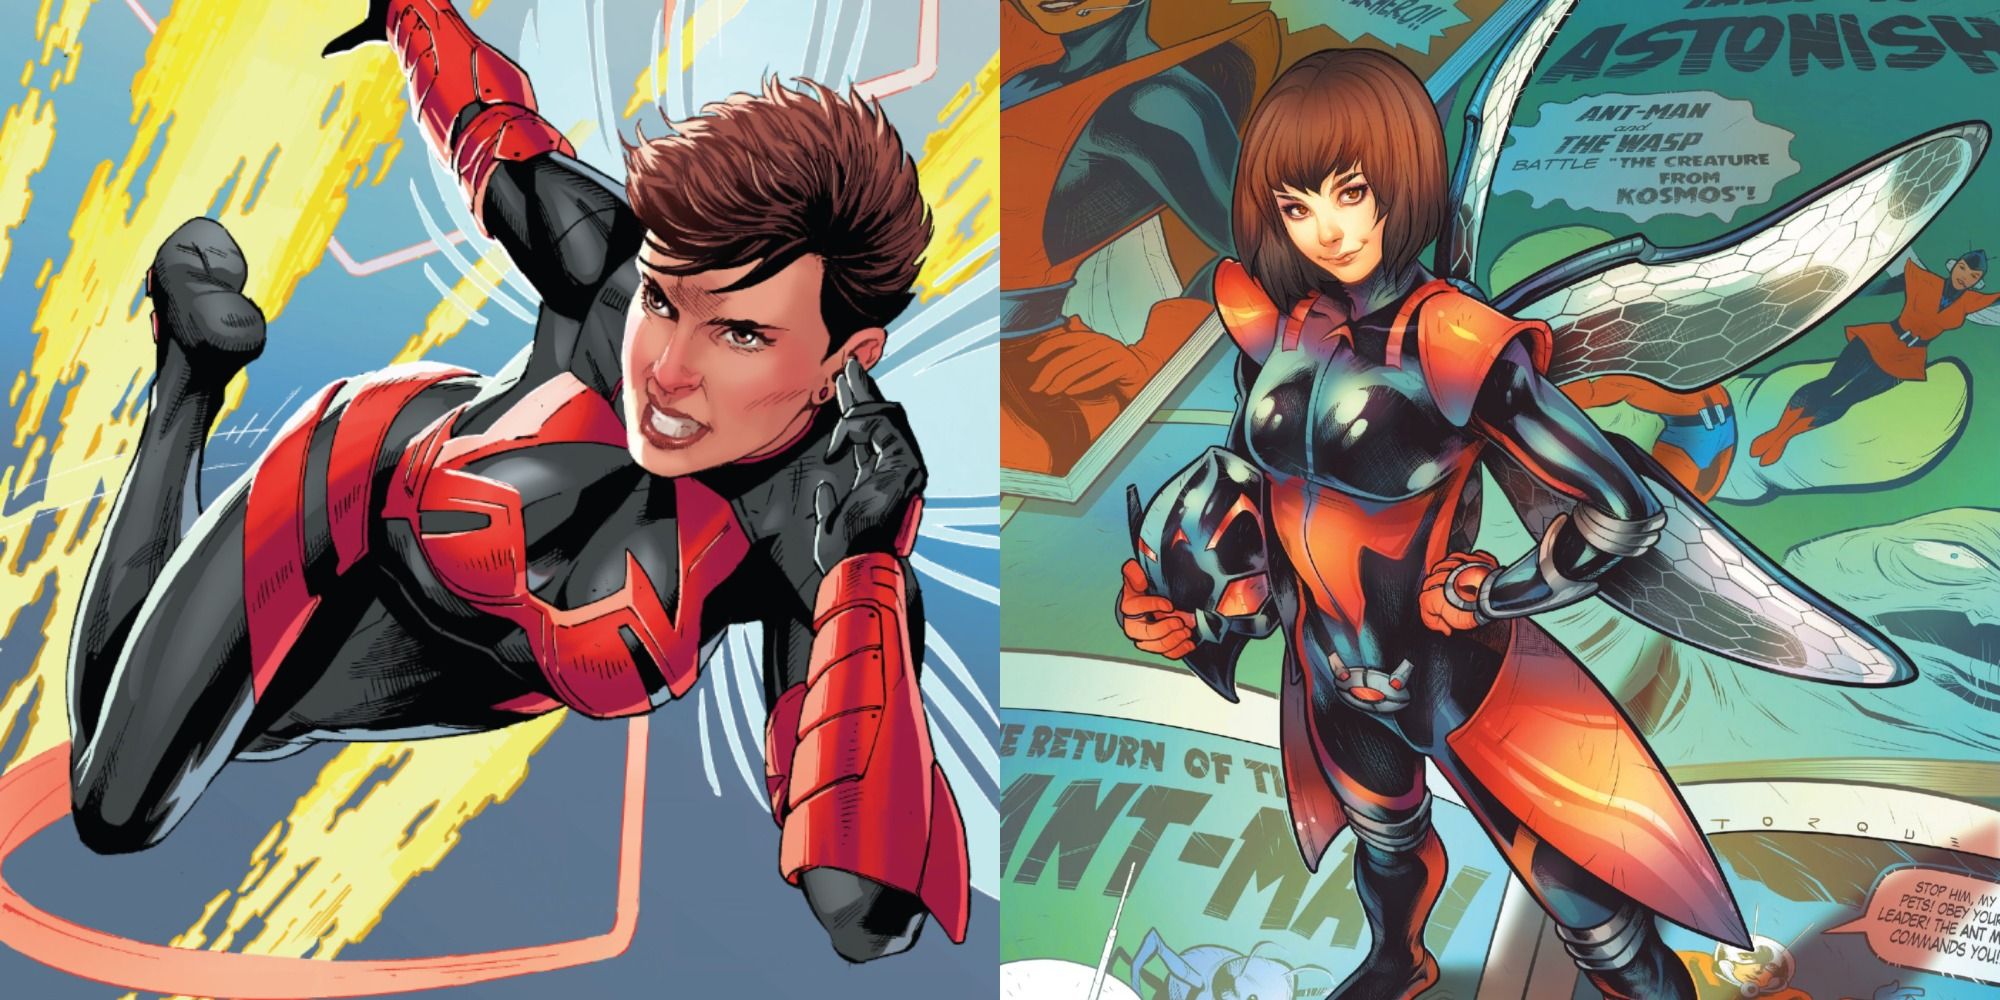 10 Classic Marvel Heroes And Their Modern Day Counterparts